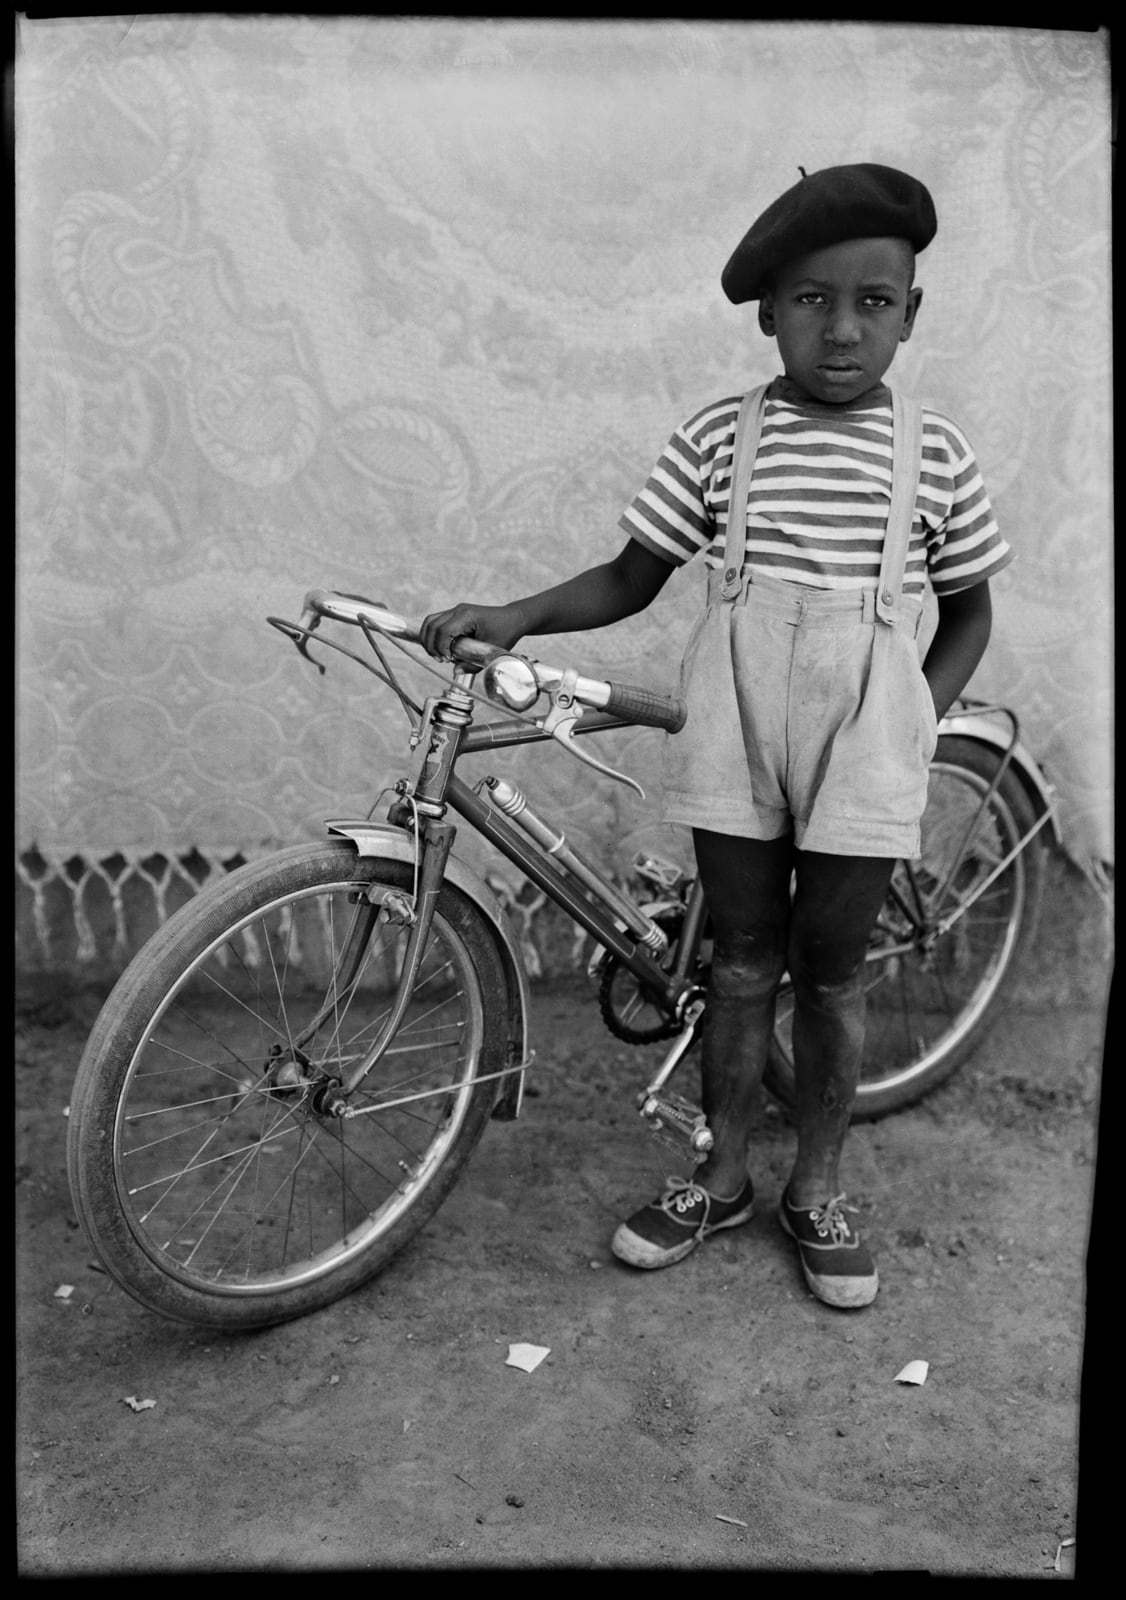 Seydou Keïta Sans titre/ Untitled (02424-MA.KE.319), 1948-1954 Posthumous Gelatin black and white silver print on cartoline paper 280g 60 x 50 cm (23 5/8 x 19 5/8 in.) Edition of 10 + 2 AP Posthumous Gelatin black and white silver print on cartoline paper 280g back-mounted on Aluminium 1mm 162 x 122 cm (63 25/32 x 48 1/32 in) Edition of 5 + 2 AP